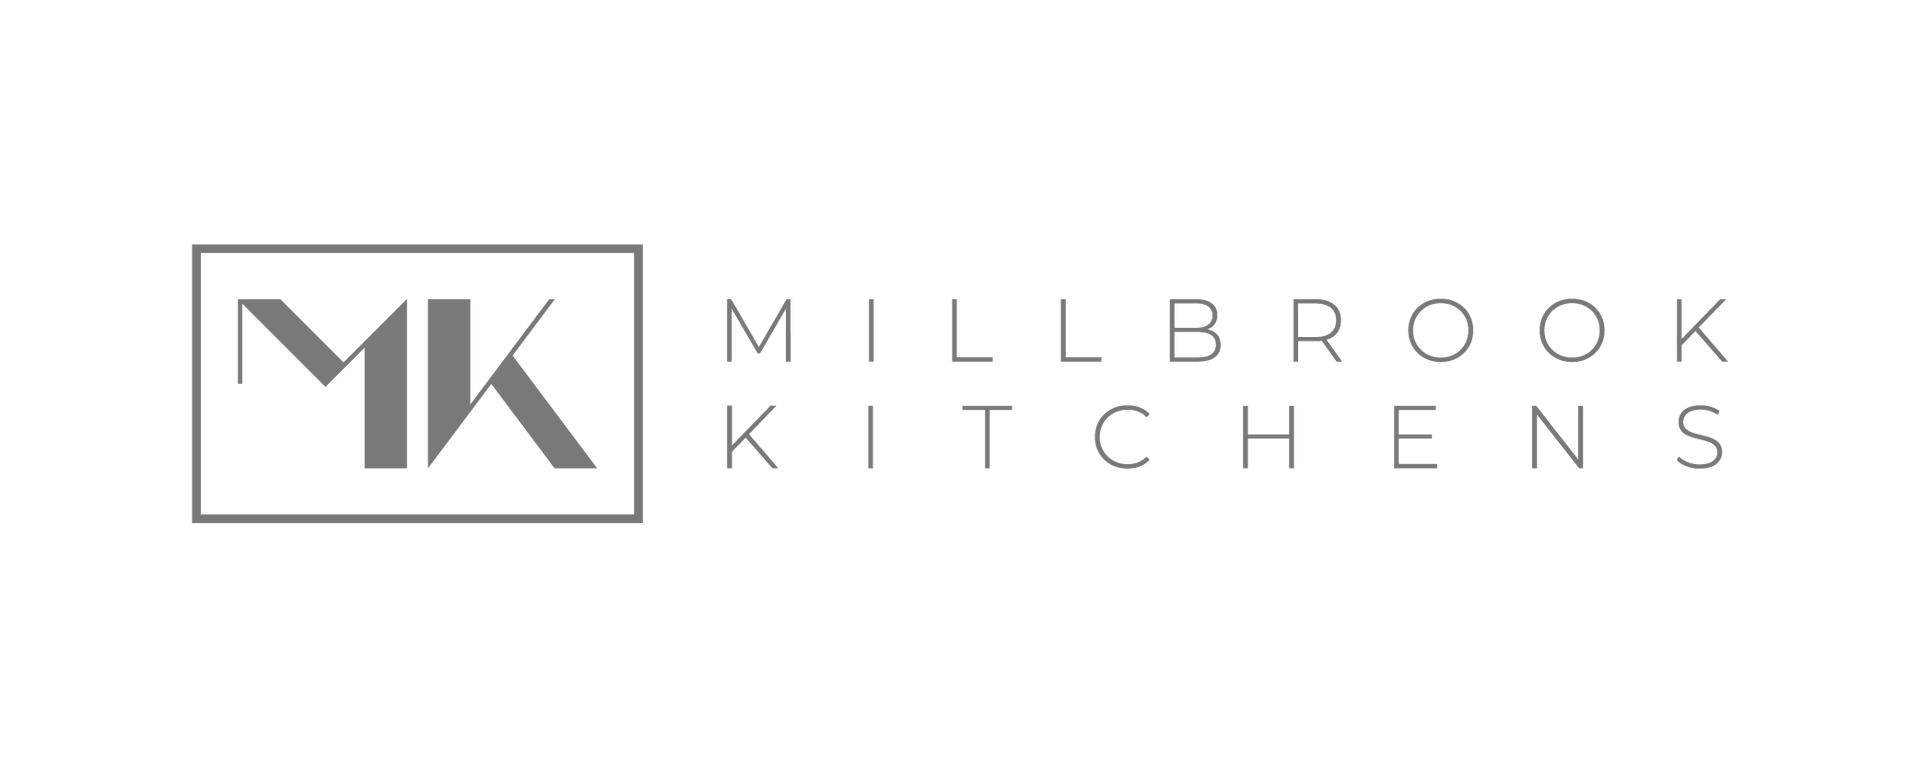 a logo for millbrook kitchens is shown on a white background